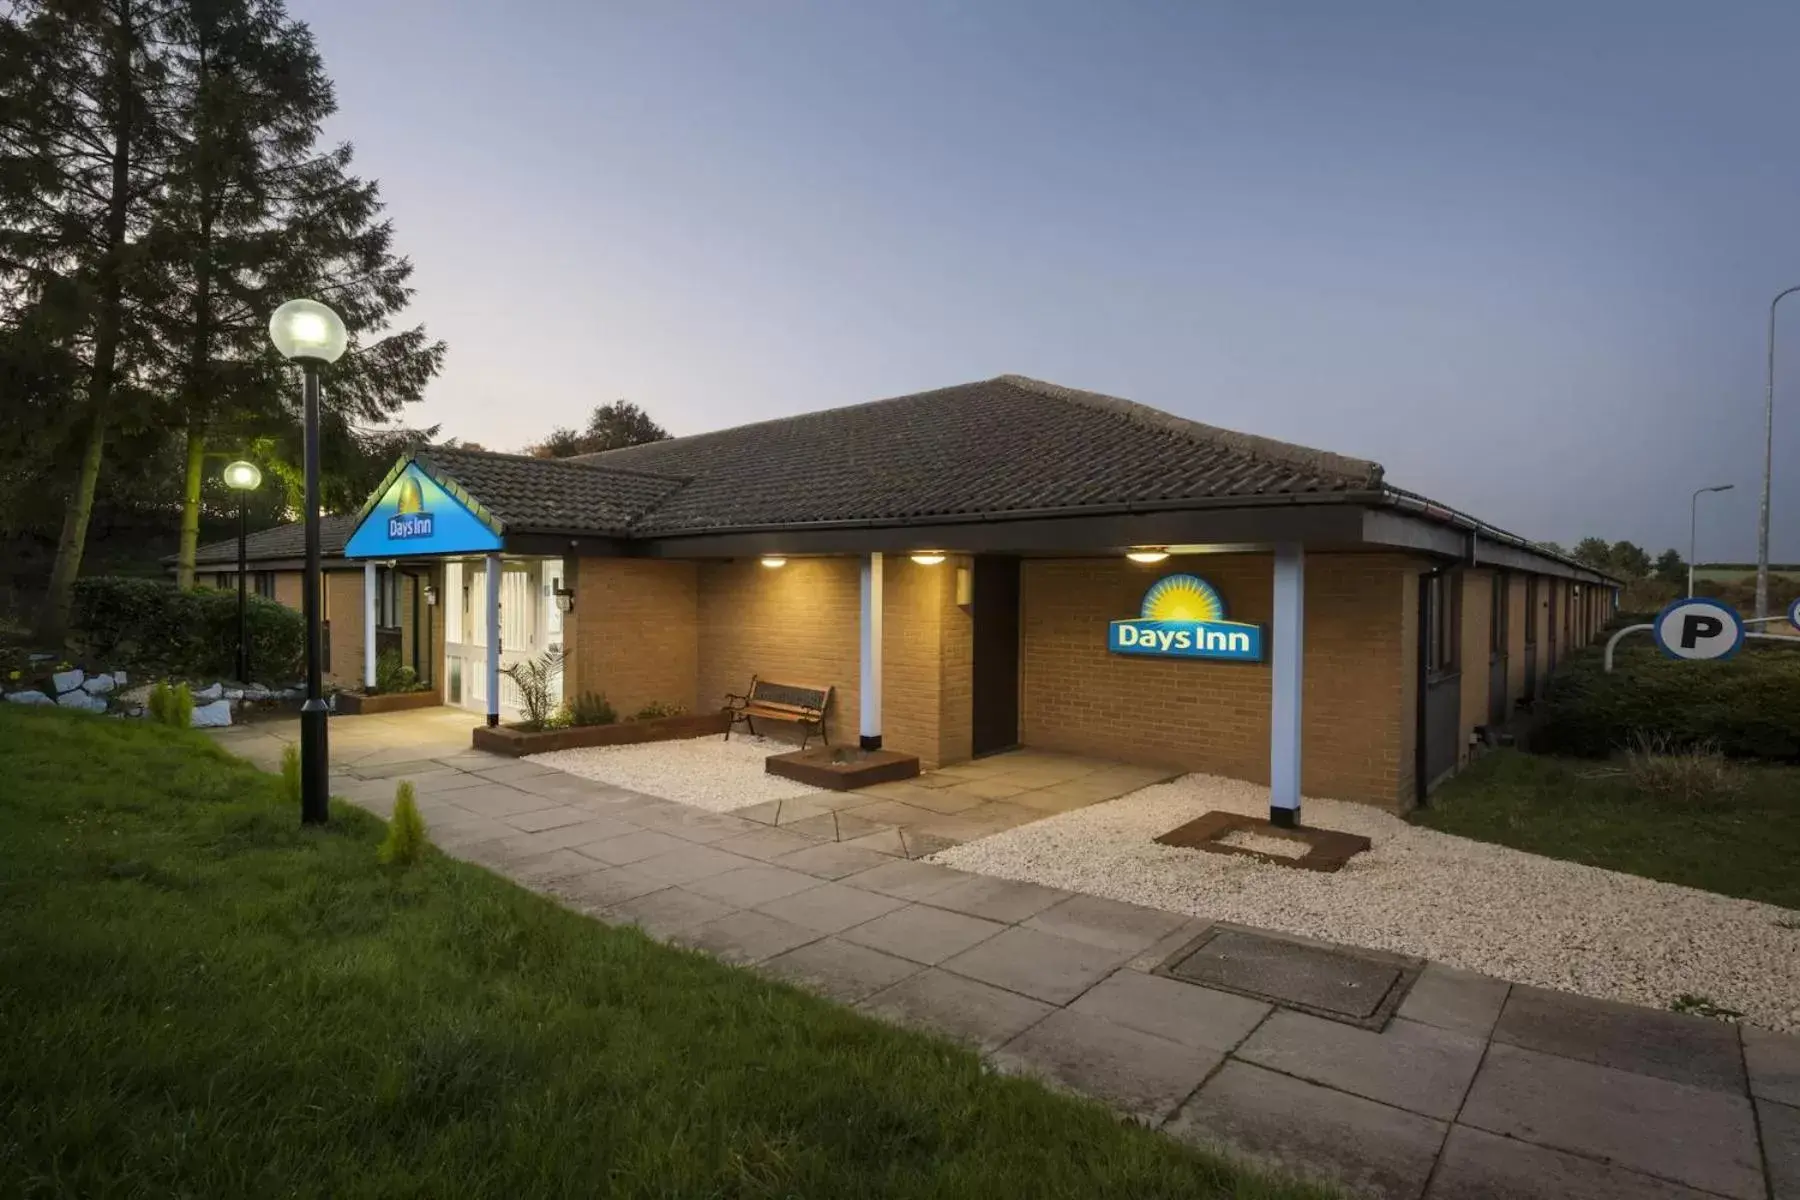 Facade/entrance, Property Building in Days Inn Sutton Scotney North